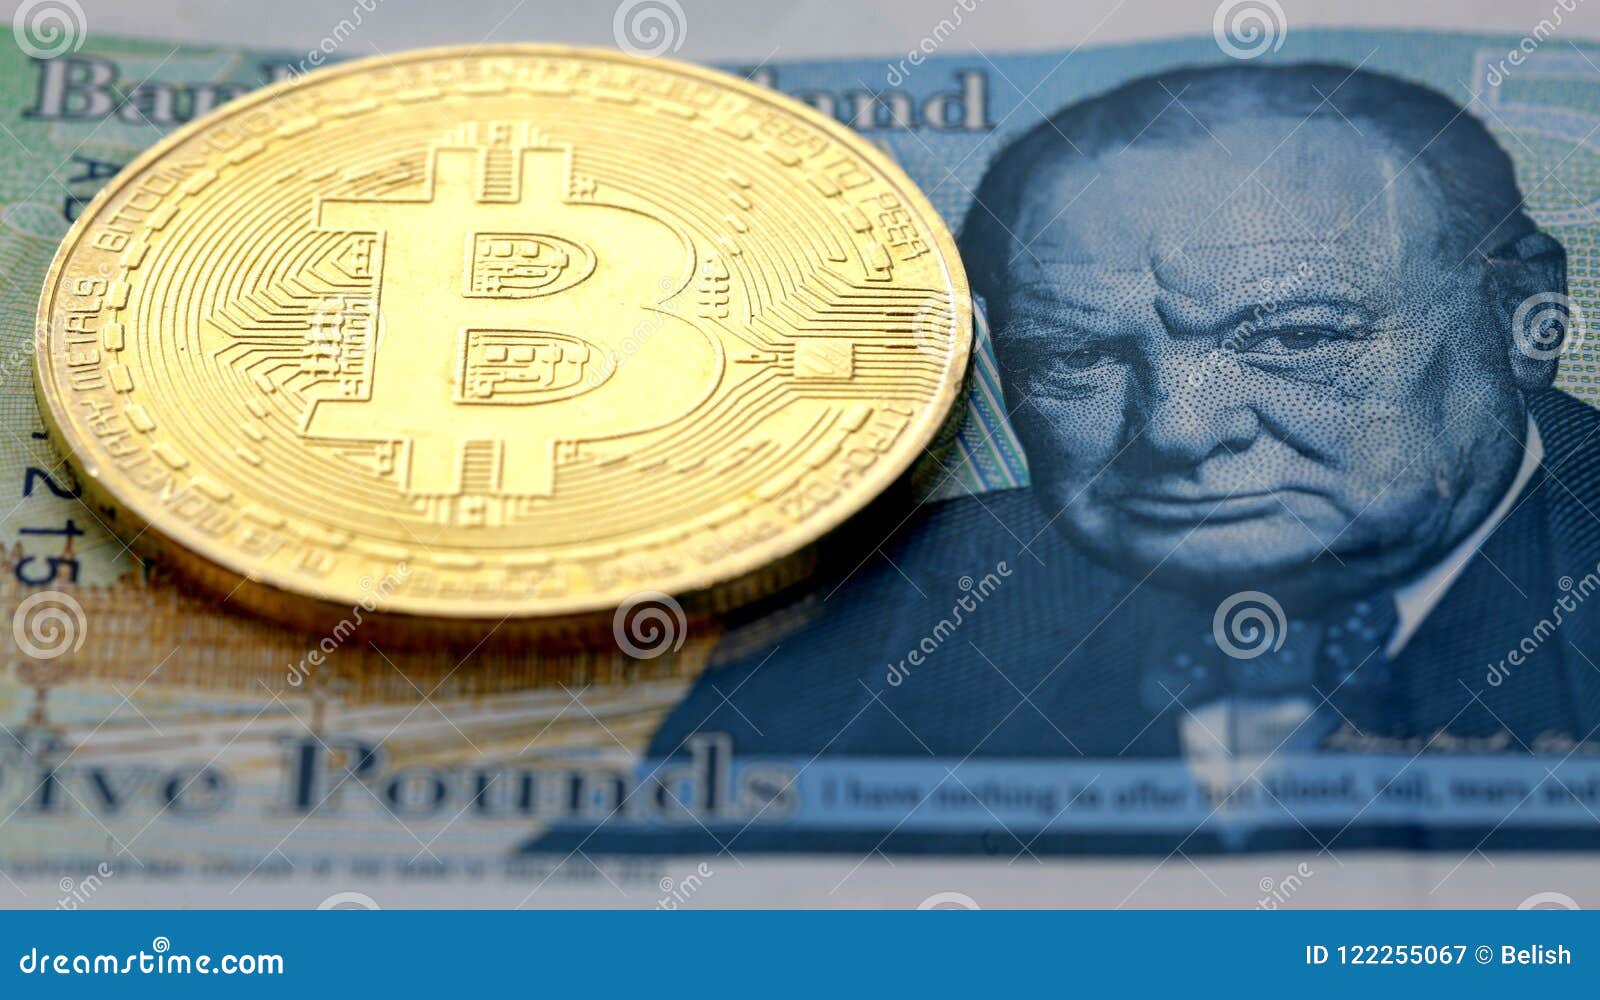 1 bitcoin in pounds sterling